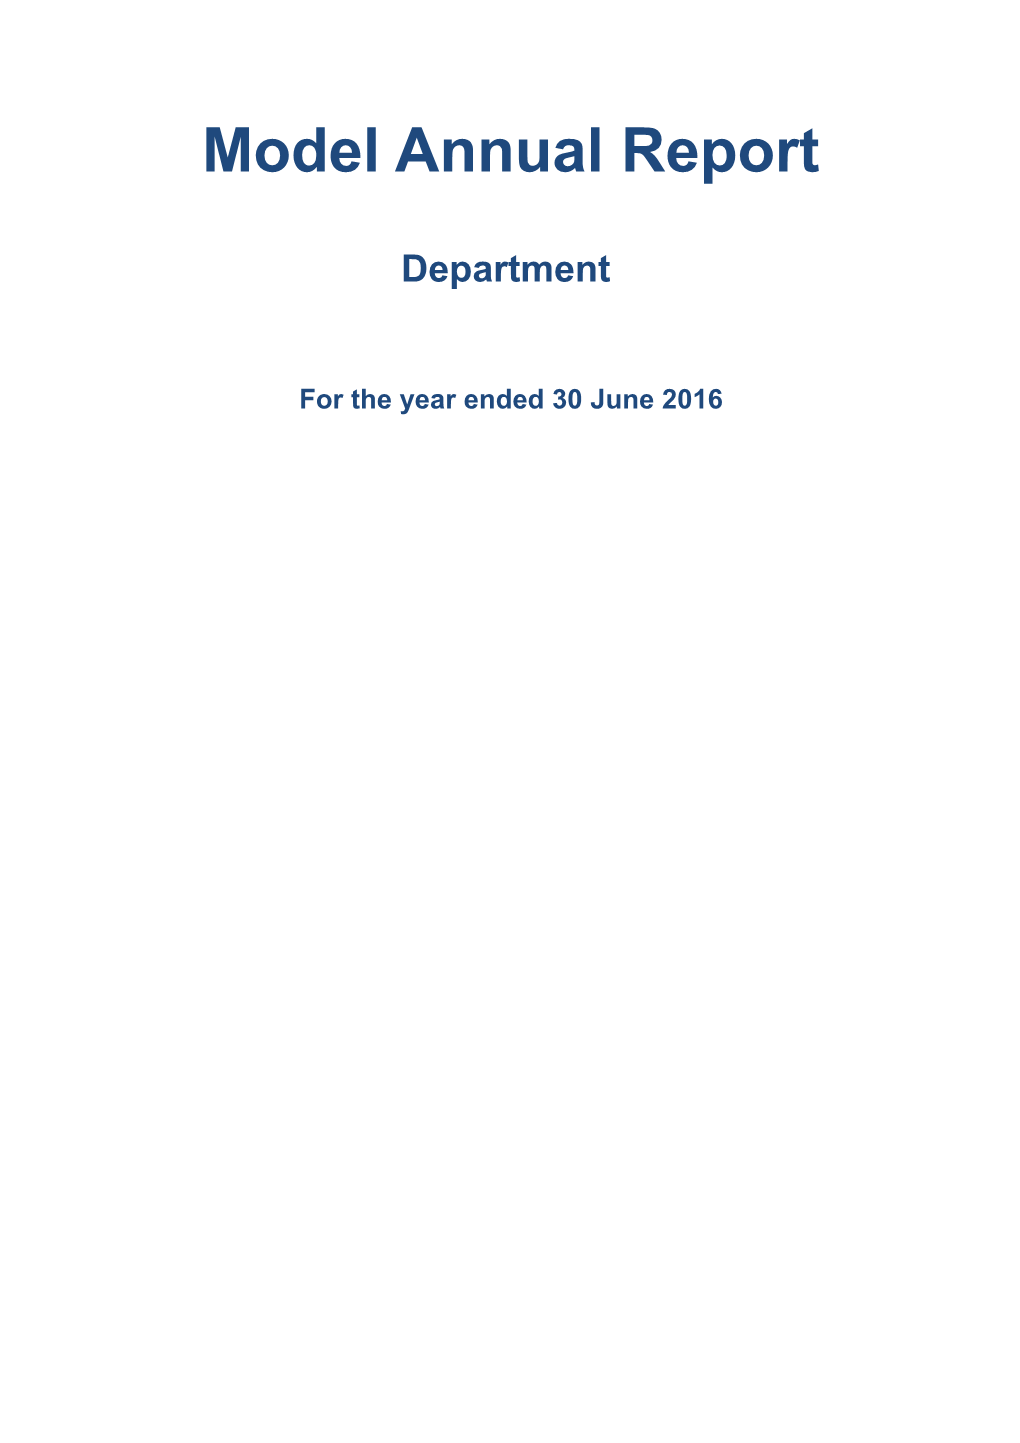 Model Annual Report for Departments - for the Year Ended 30 June 2016